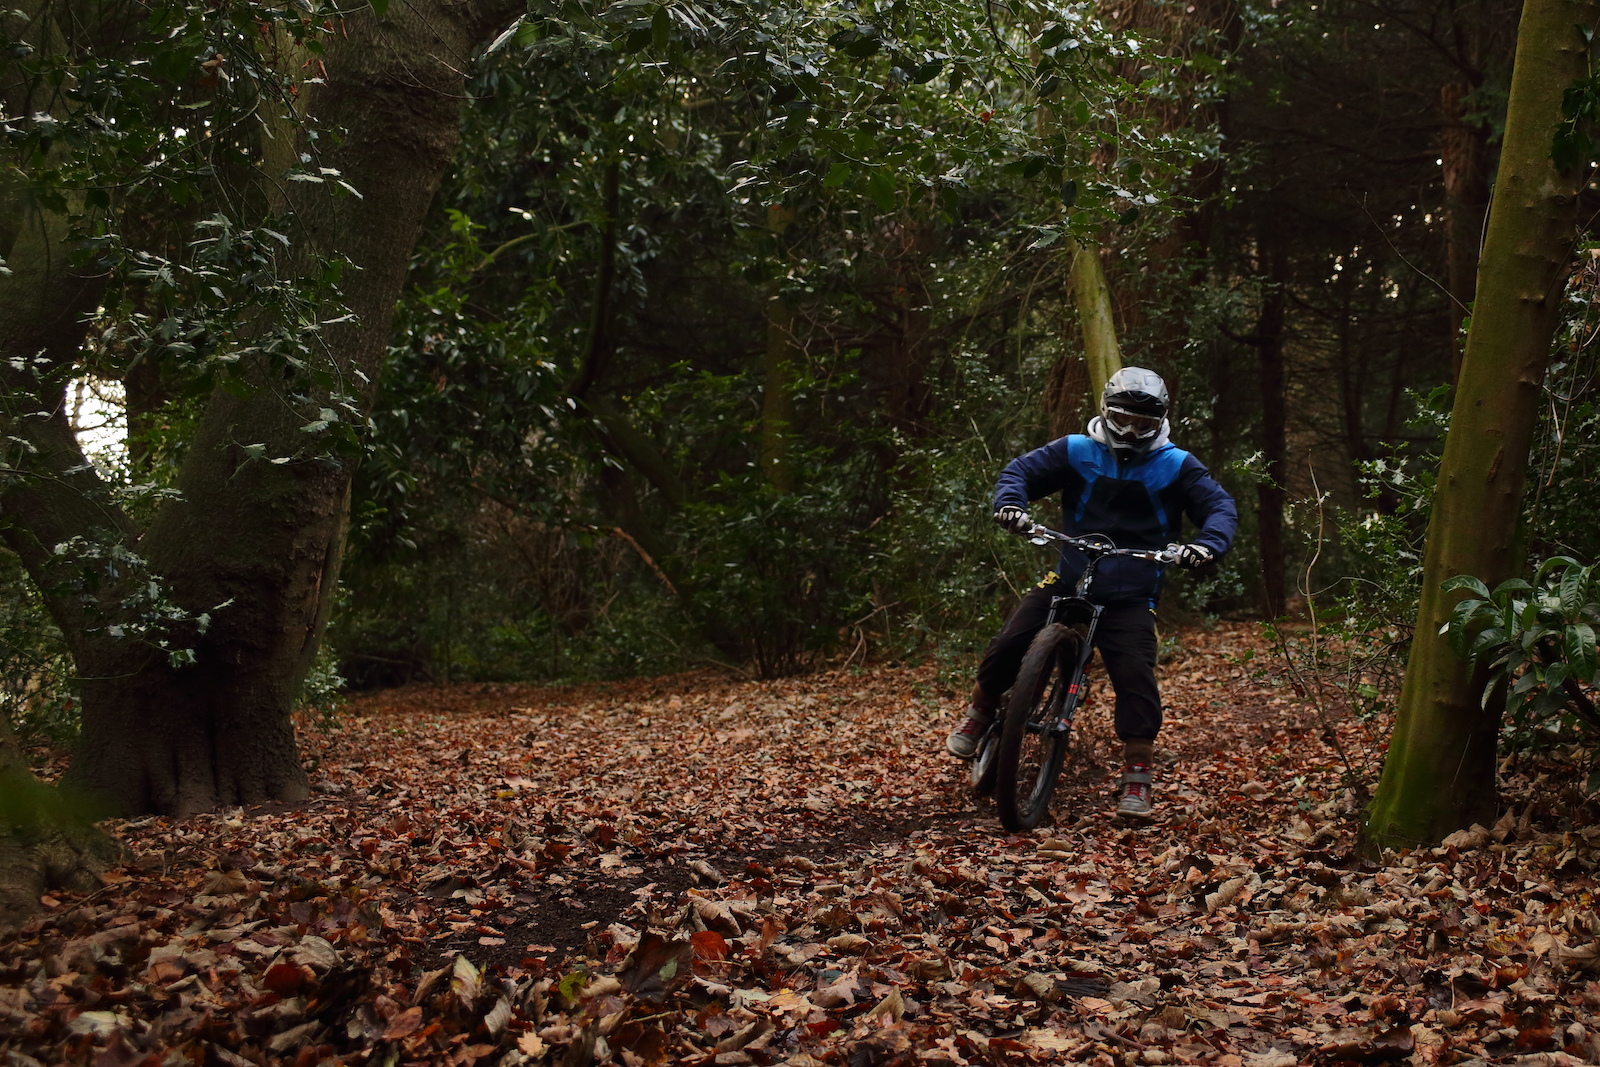 Self portrait of me riding through the woods at the top of darley abbey park.